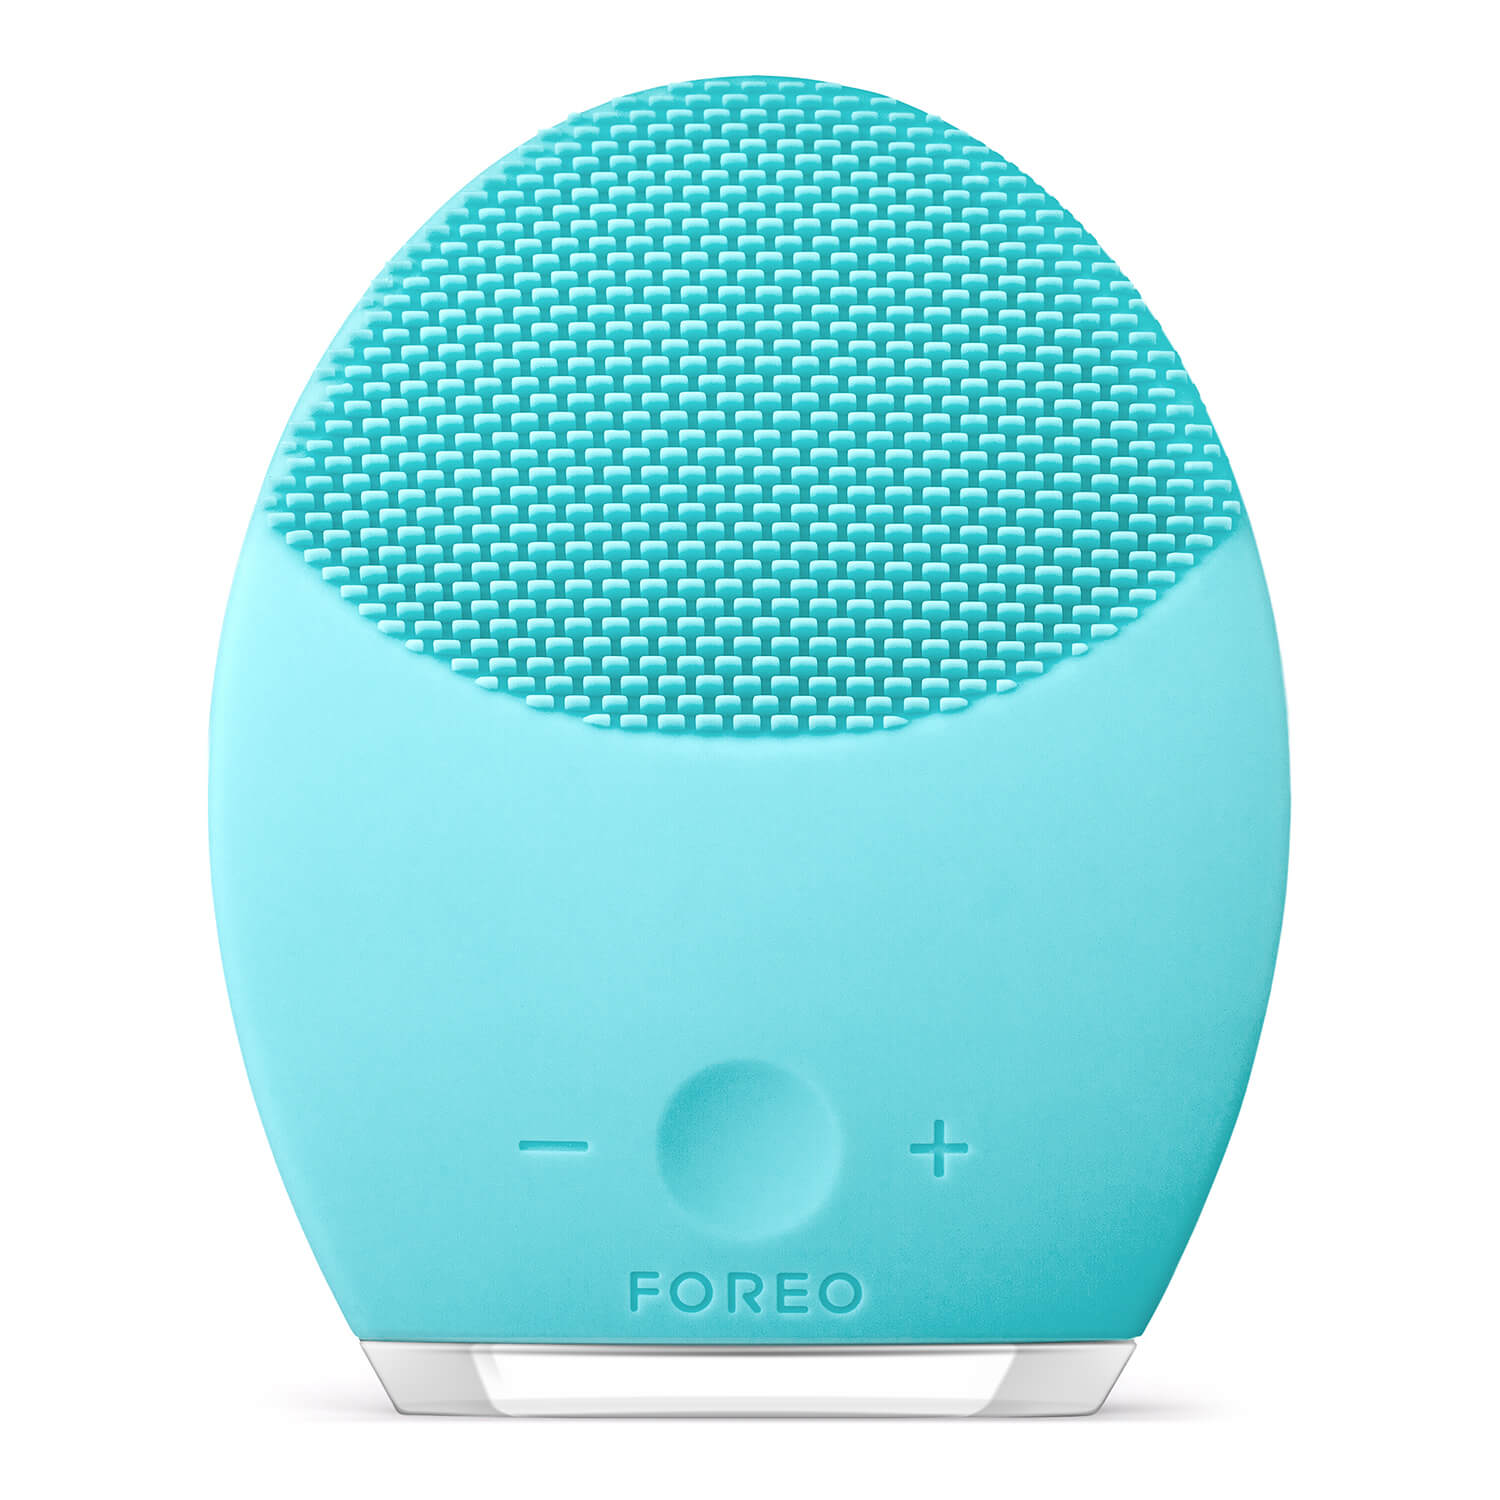 FOREO LUNA 2 Anti-Ageing and Facial Cleansing Brush (Various Options) - For Oily Skin